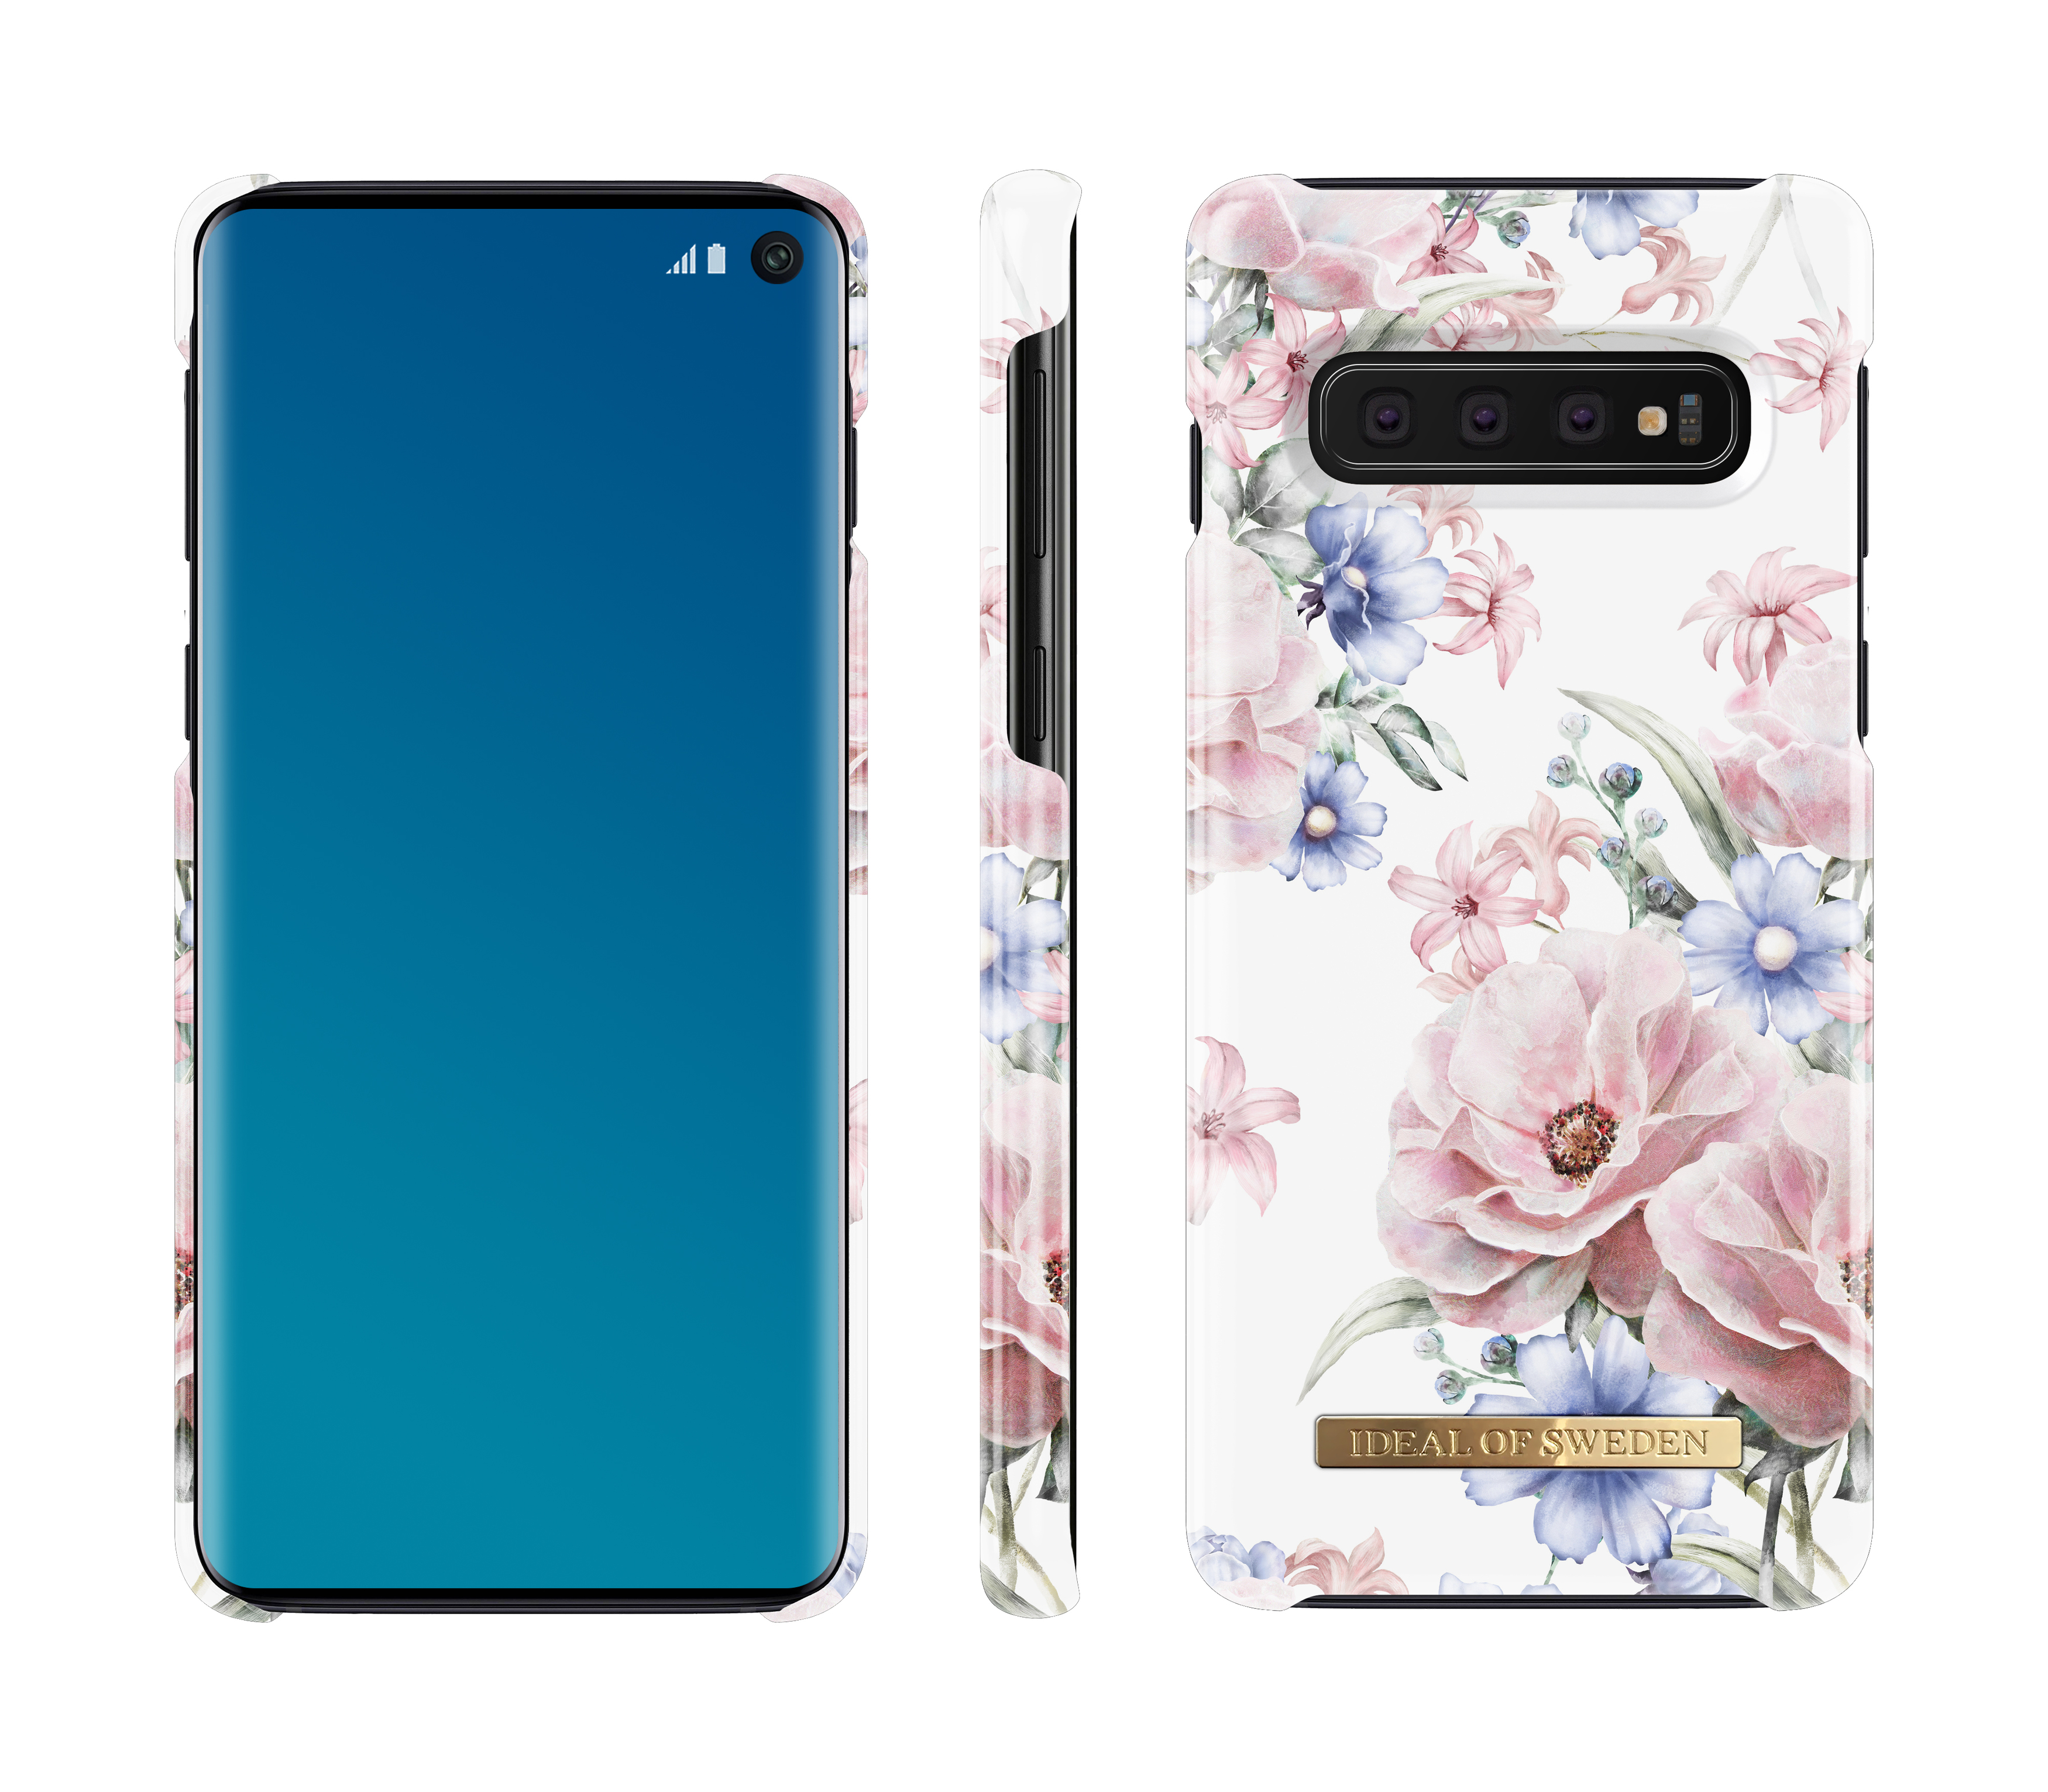 Fashion, Samsung, Backcover, Galaxy SWEDEN S10, Floral OF IDEAL Romance